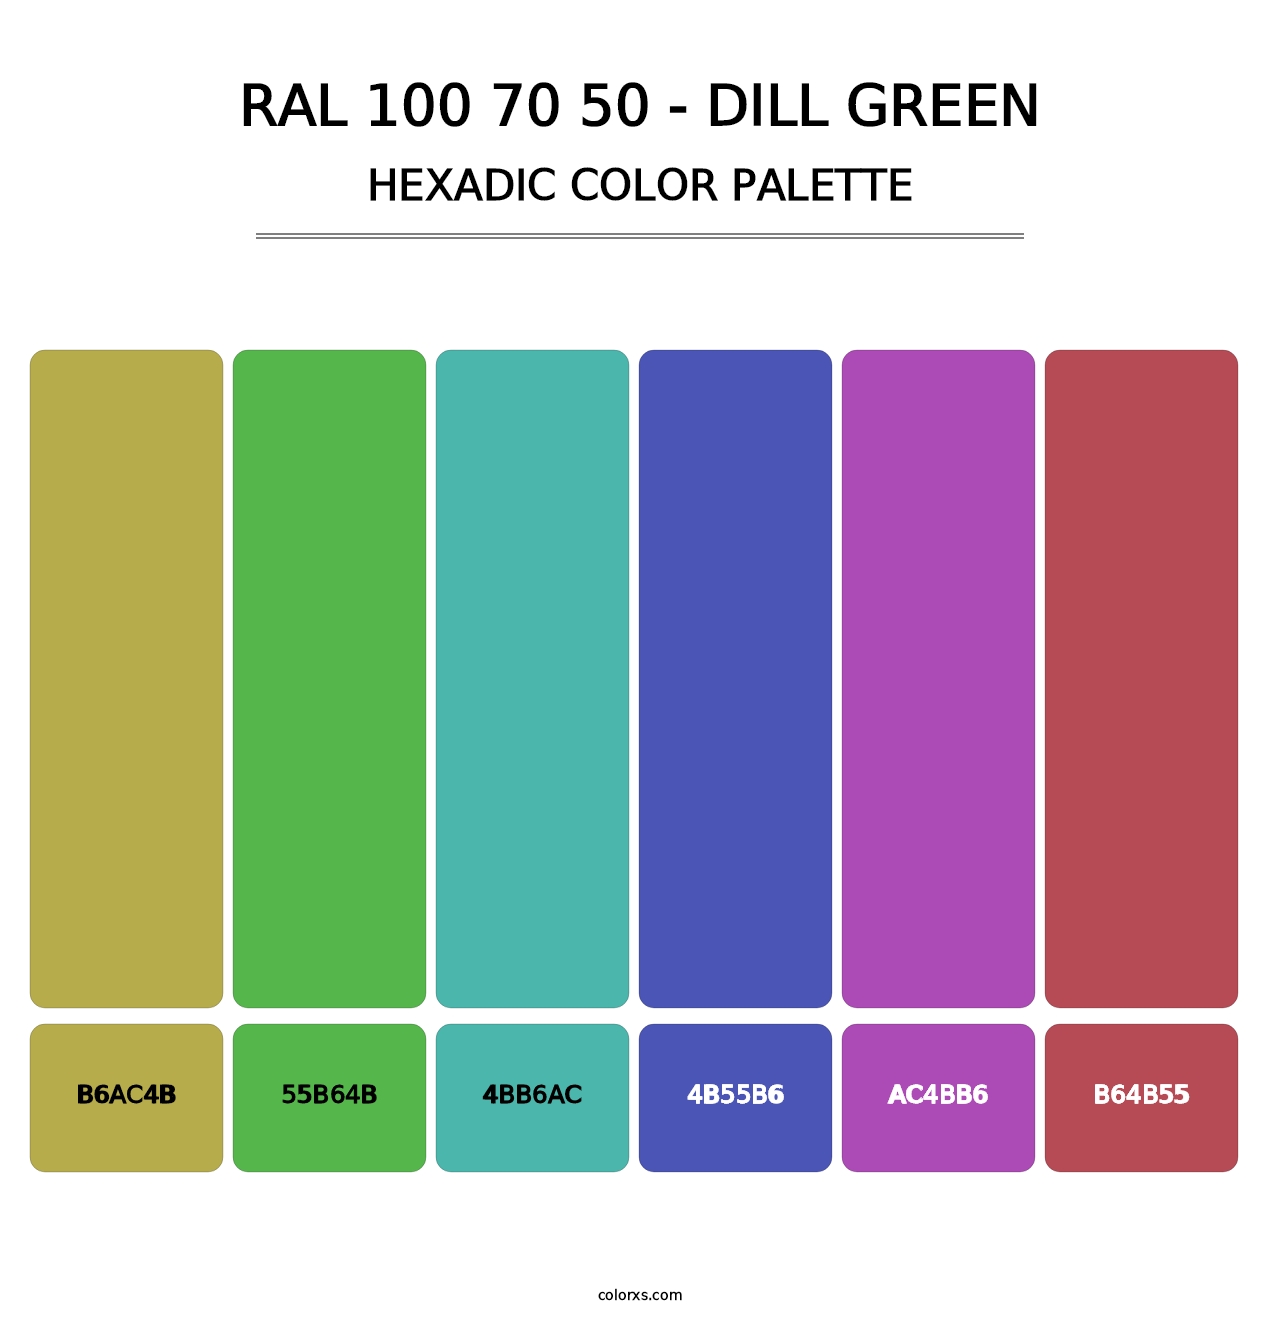 RAL 100 70 50 - Dill Green - Hexadic Color Palette